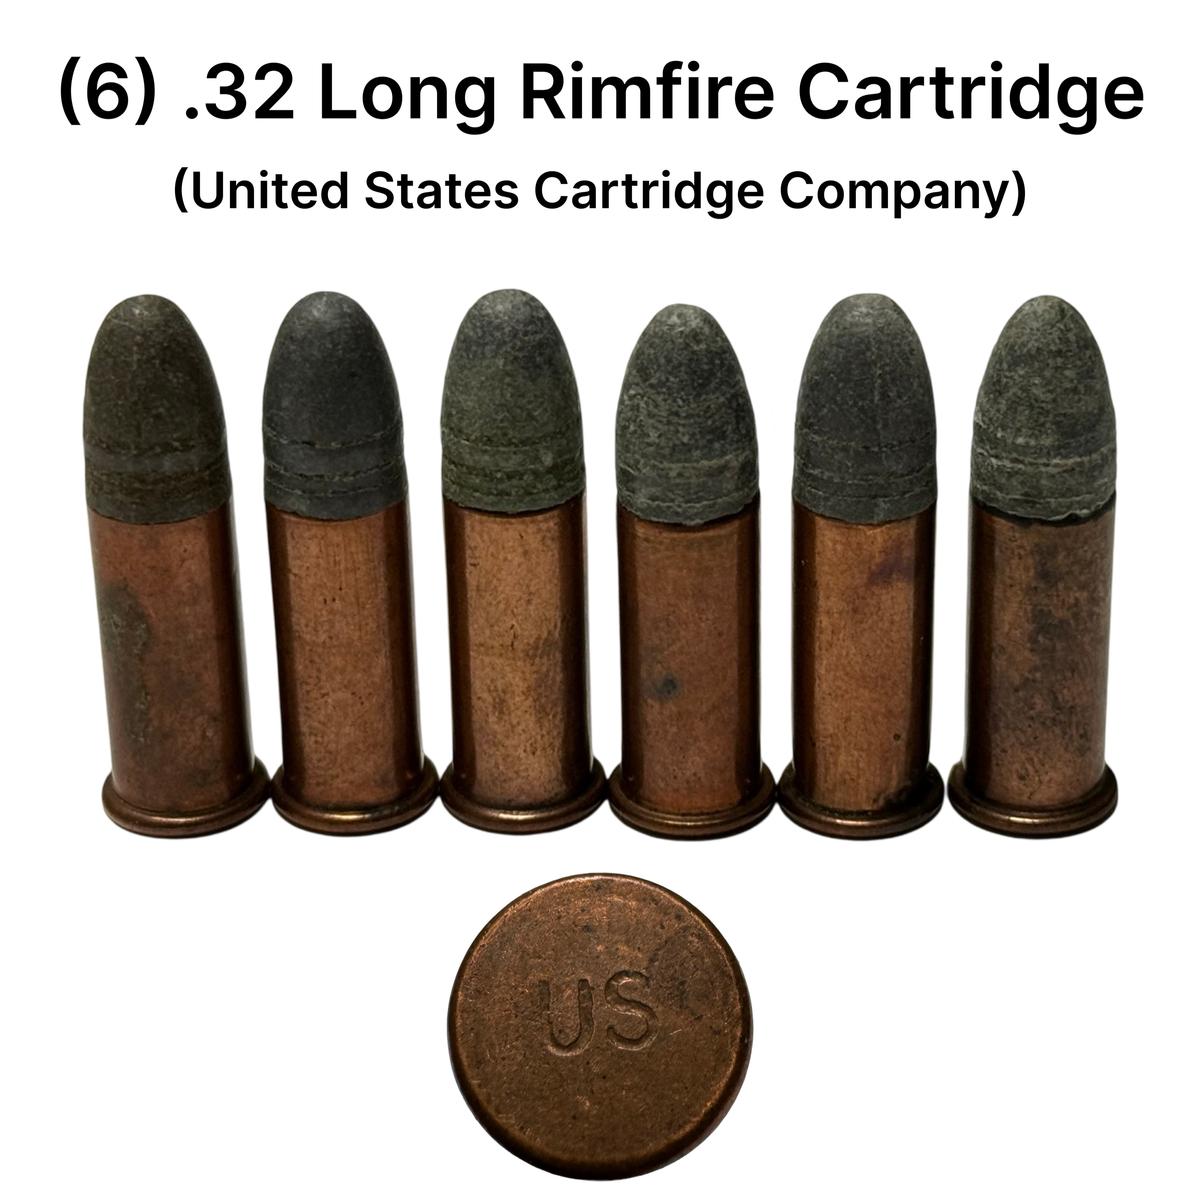 6rds. of .32 LONG Rimfire Ammunition by the United States Cartridge Company